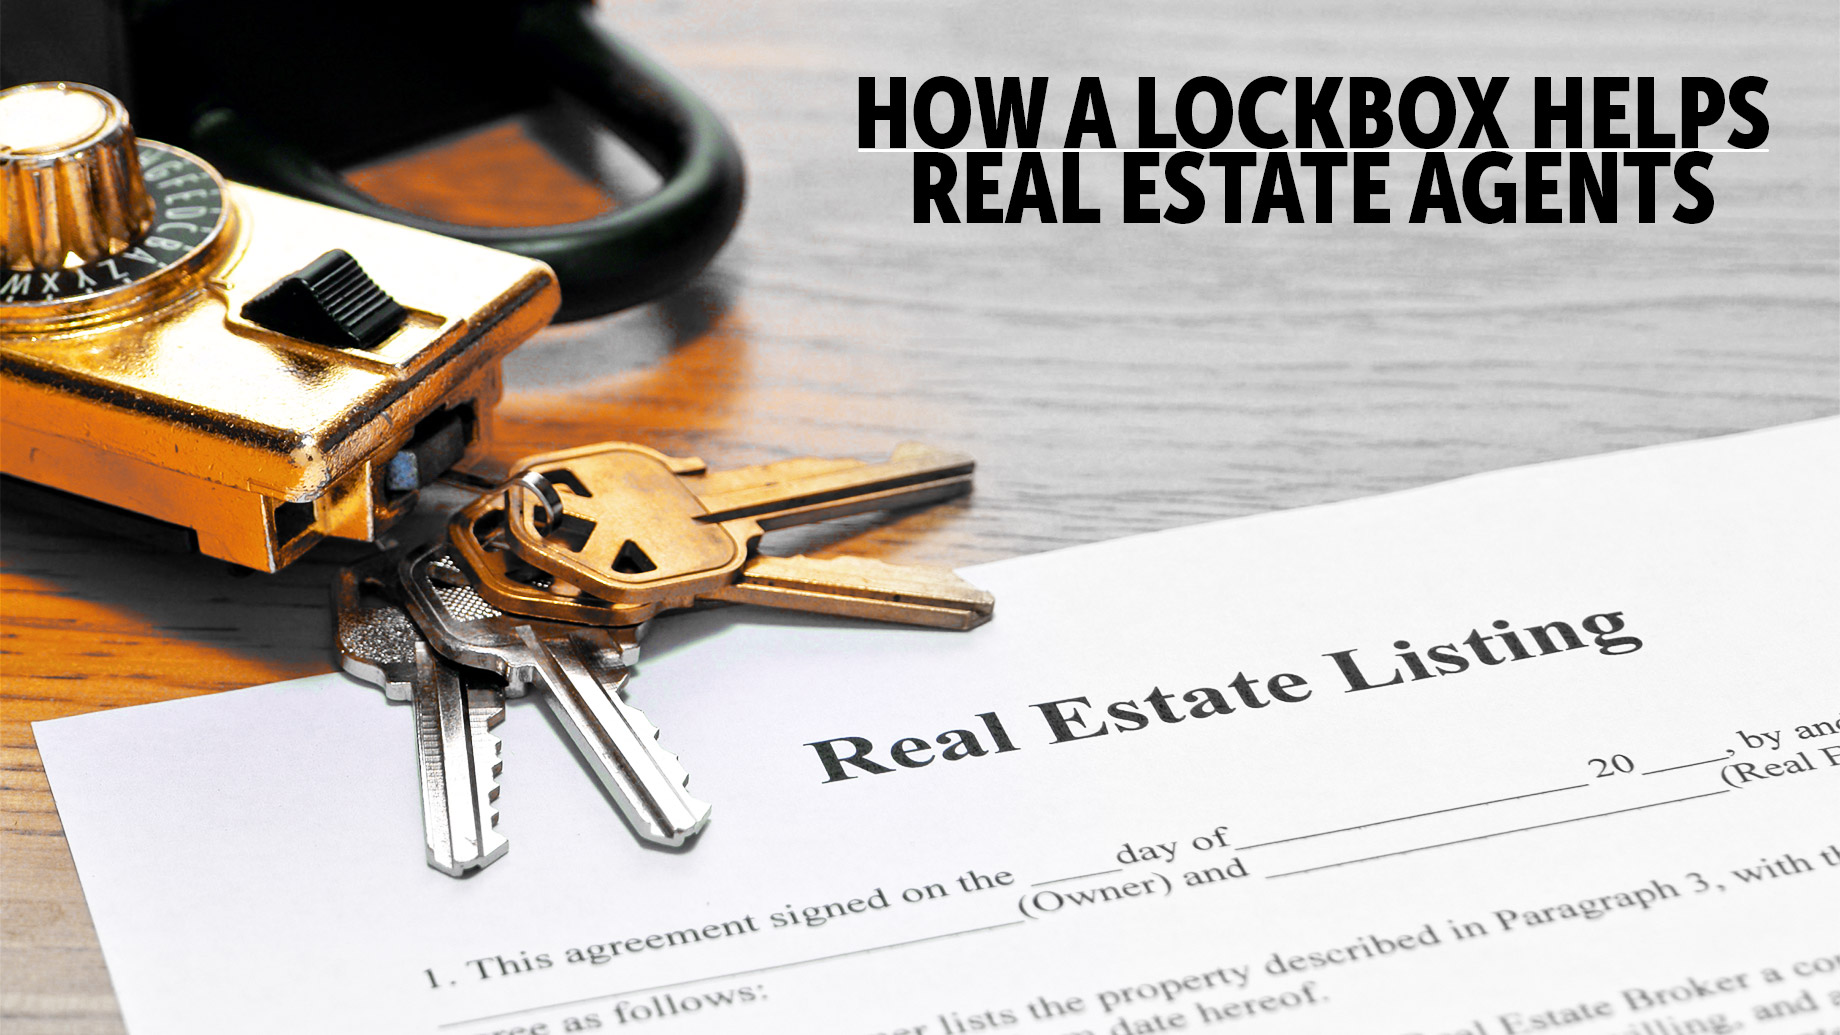 How a Lockbox Helps Real Estate Agents